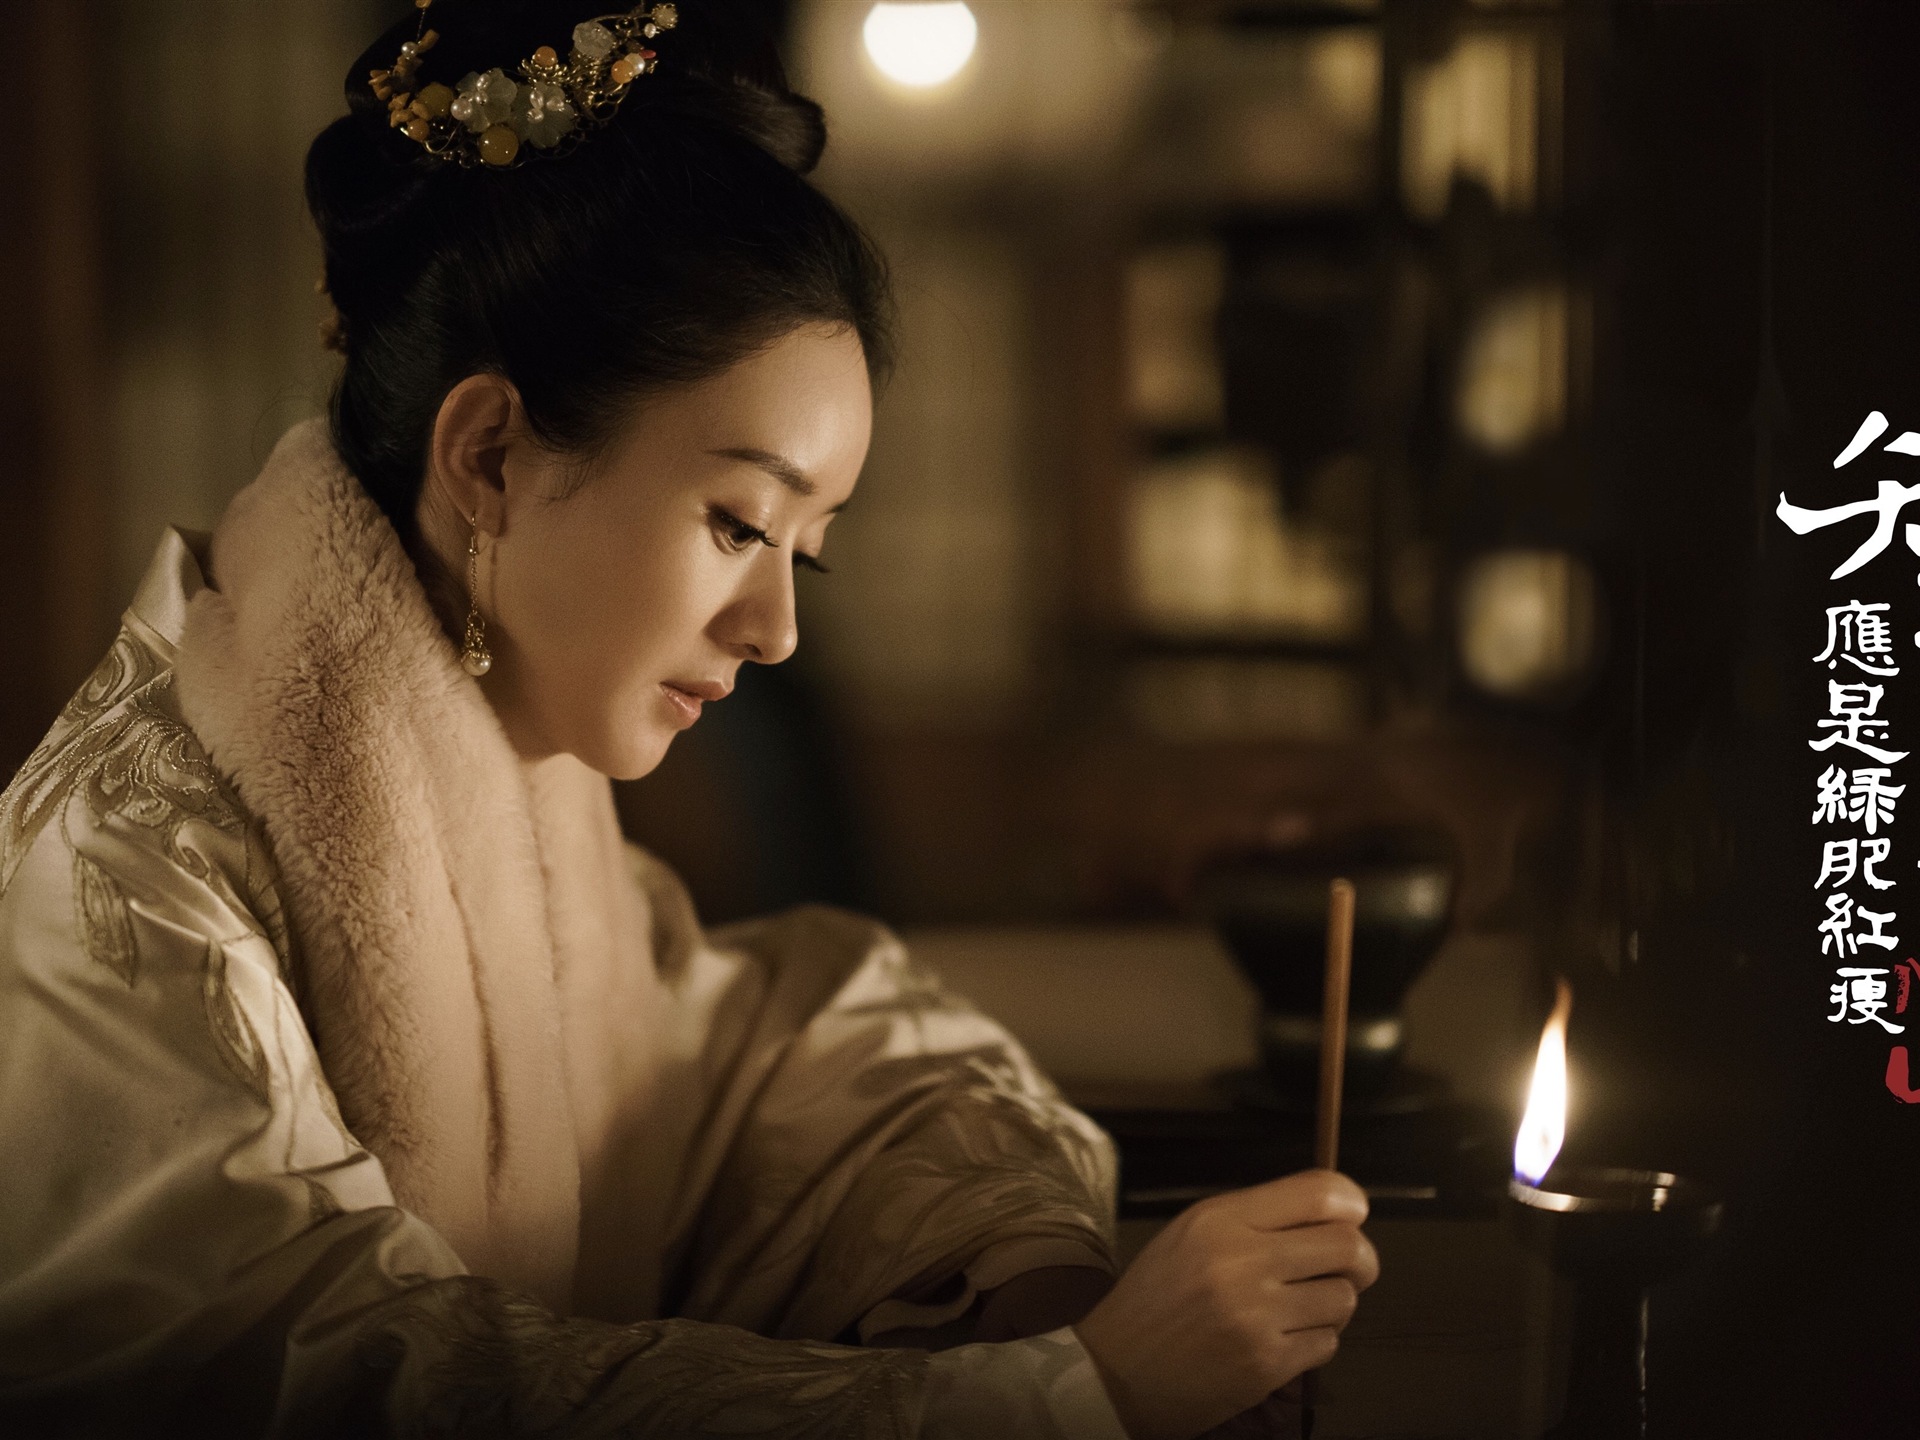 The Story Of MingLan, TV series HD wallpapers #26 - 1920x1440